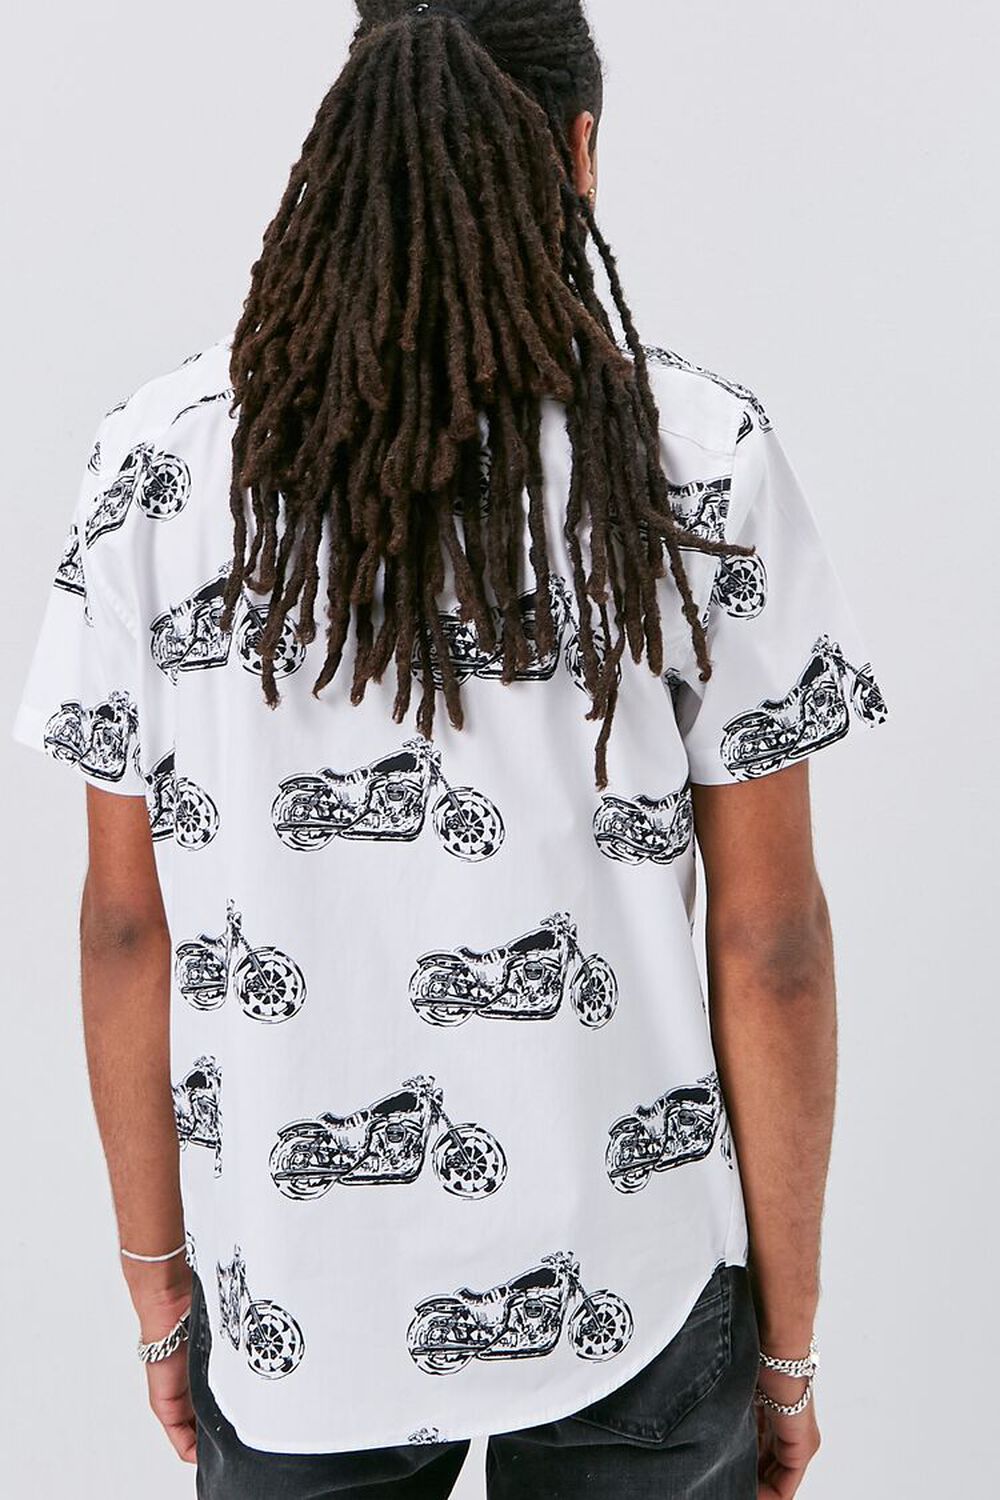 WHITE/MULTI Motorcycle Print Fitted Shirt, image 3